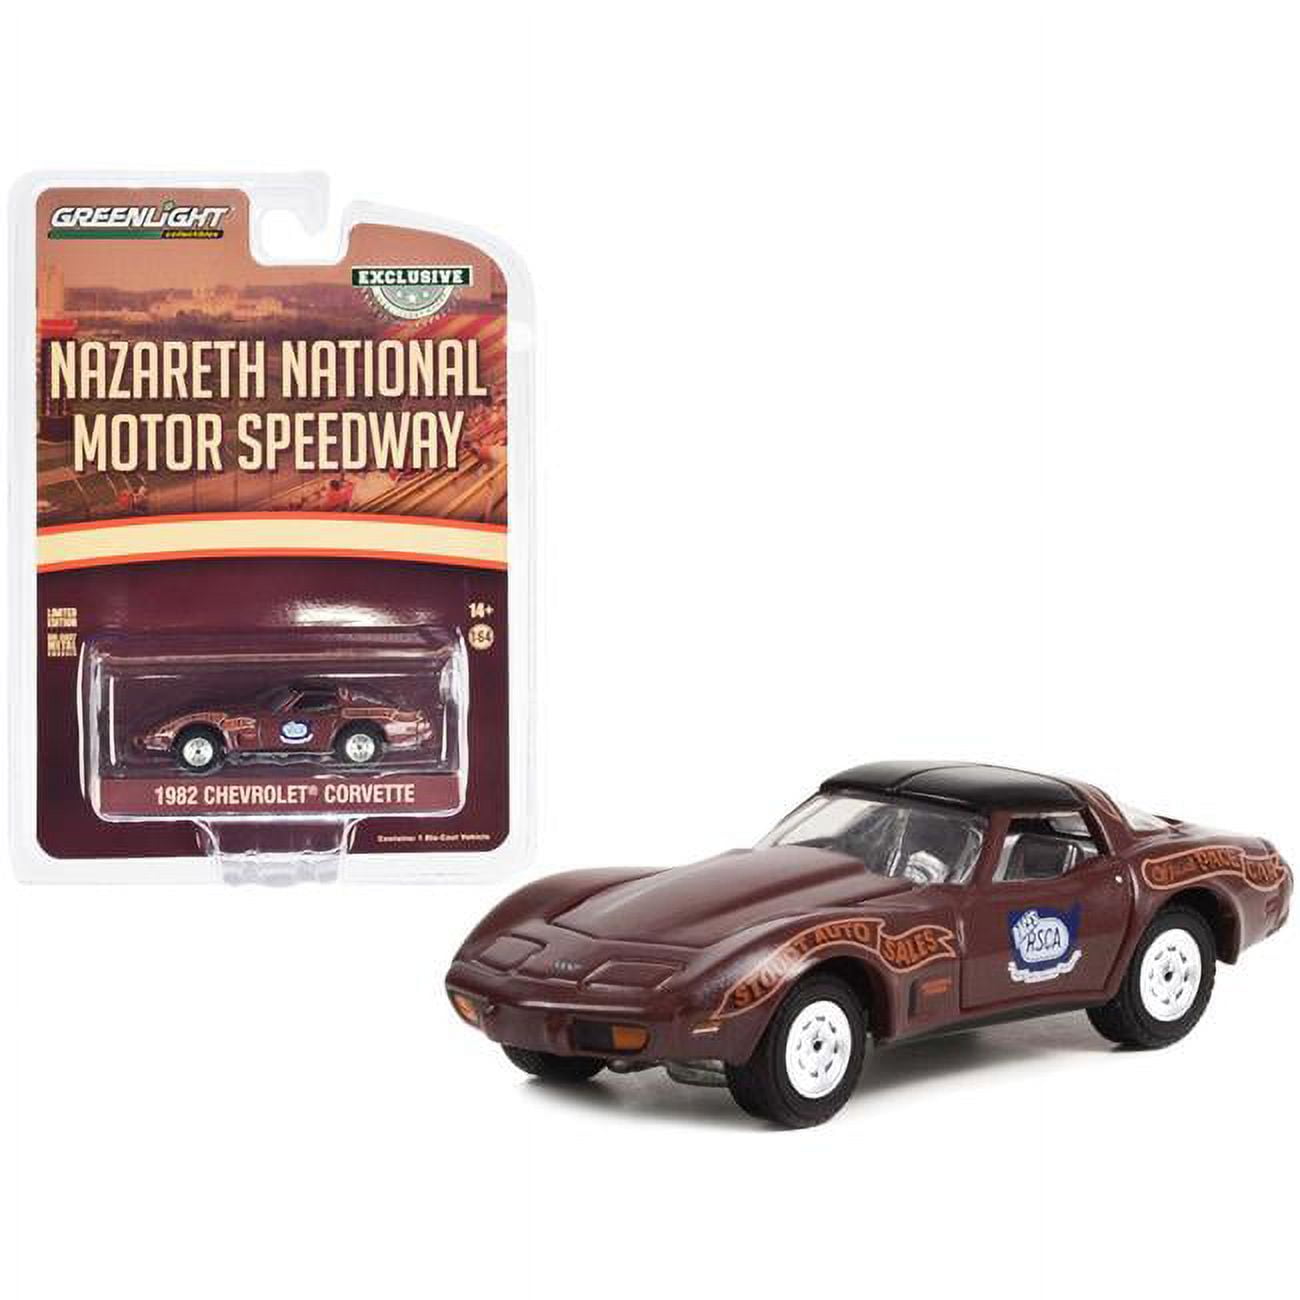 30348 Nazareth National Motor Speedway Official Pace Car Hobby Exclusive Series 1 by 64 Scale Diecast Model Car for 1982 Chevrolet Corvette -  GreenLight